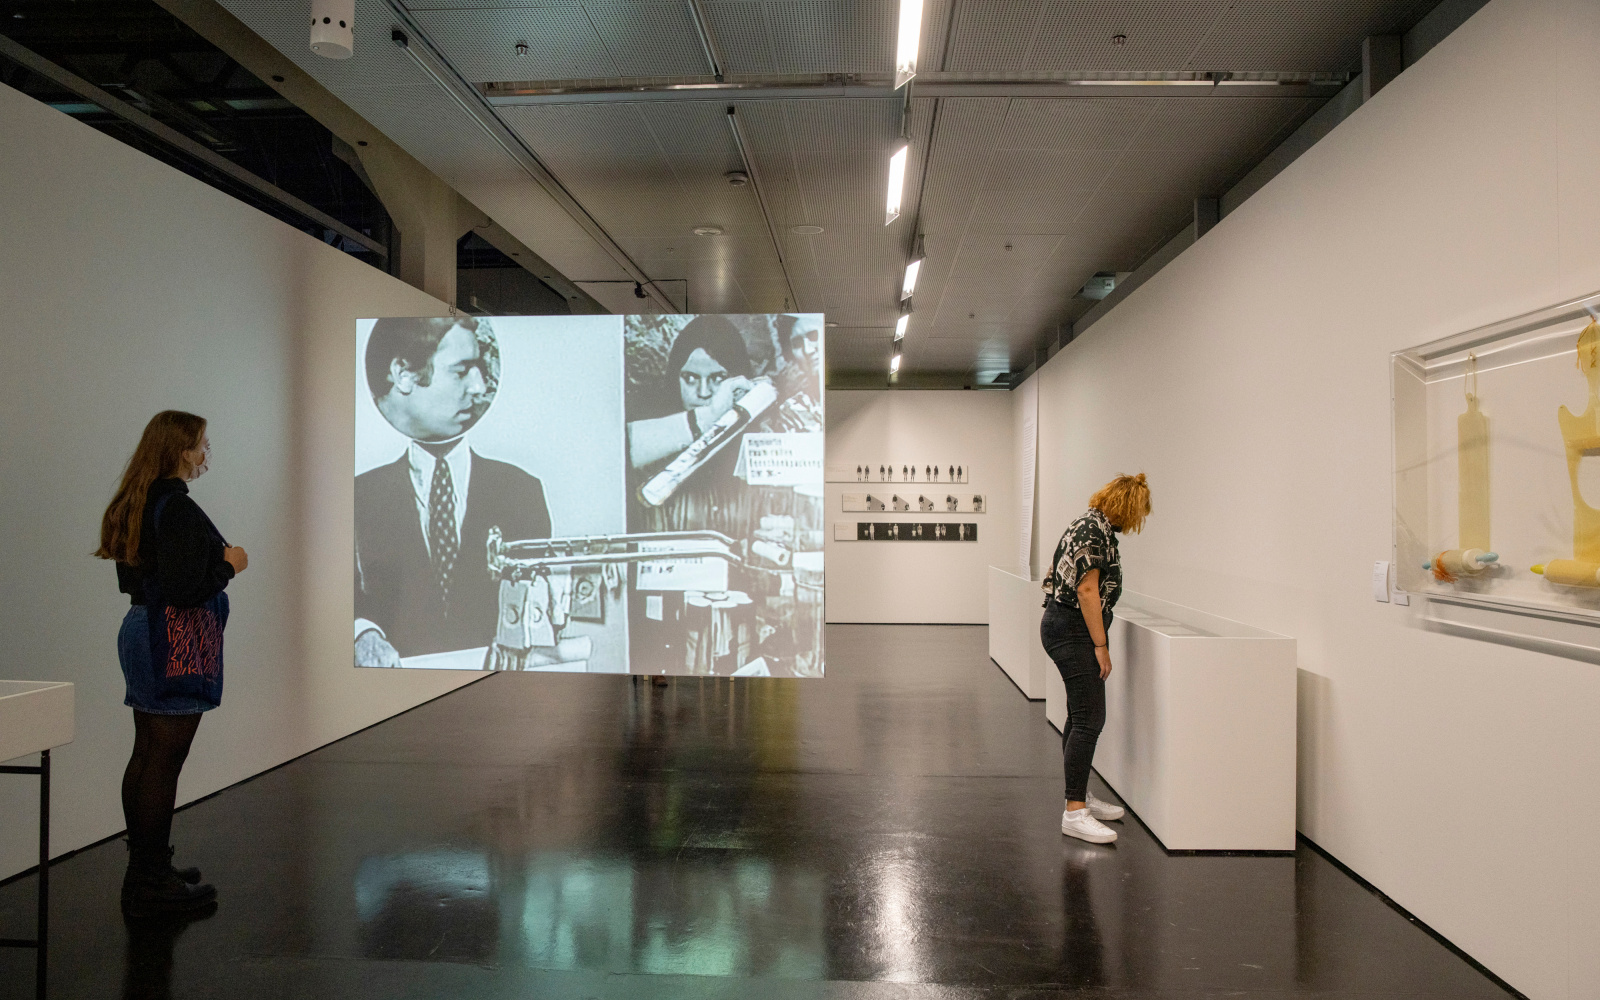 Two young women in the exhibition space. One is standing on the left wall and the other is looking at the right wall in showcases. A screen is stretched between them, on which a film clip with people can be seen.